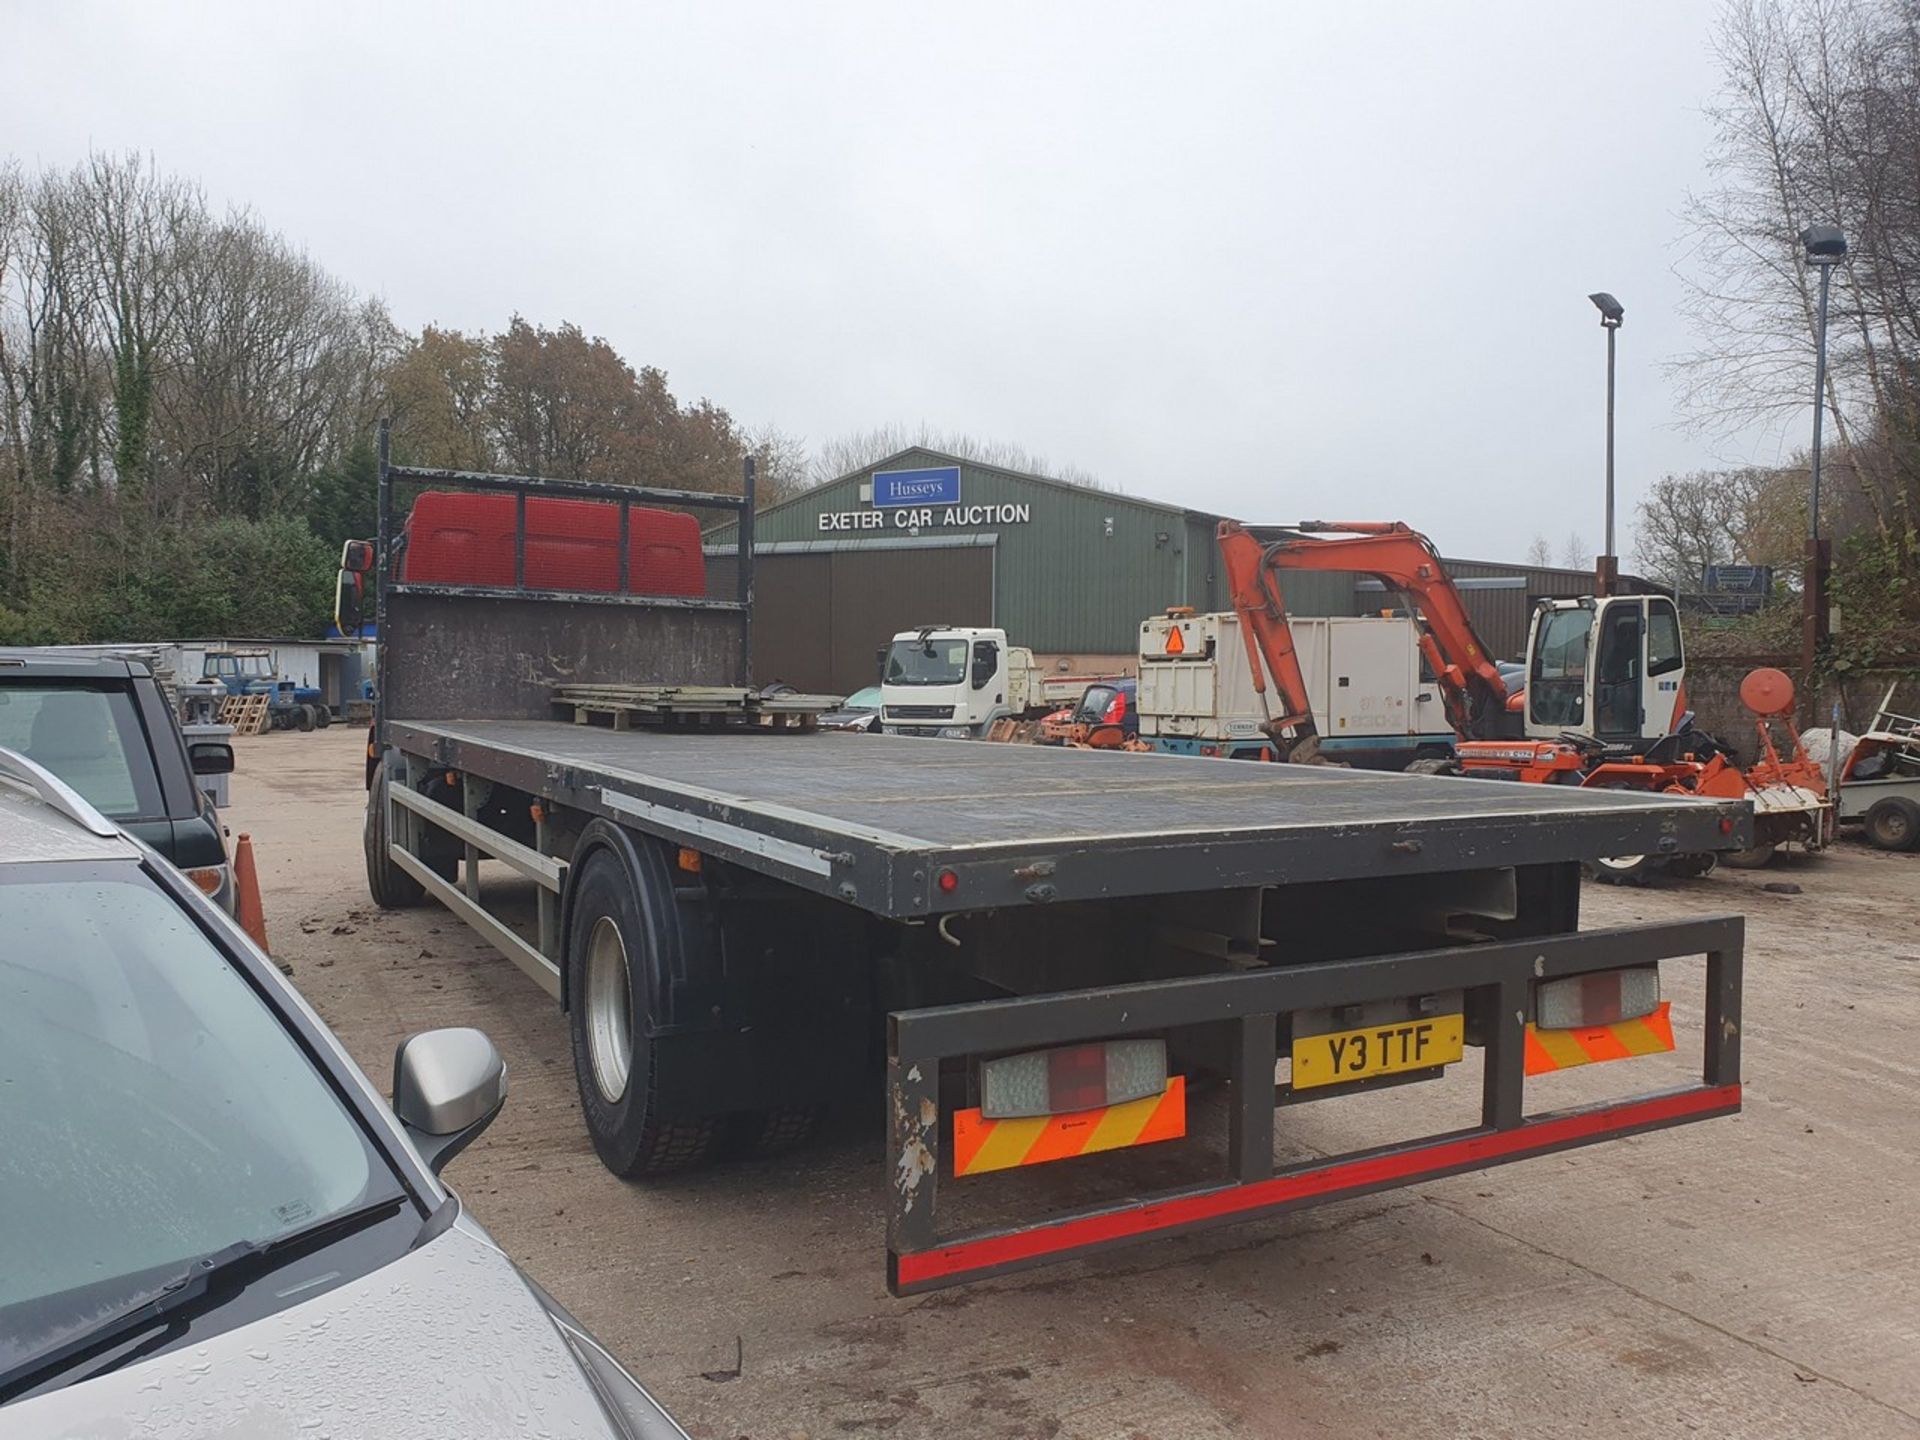 13/13 DAF TRUCKS FLAT BED - 6693cc 2dr (Red) - Image 18 of 23